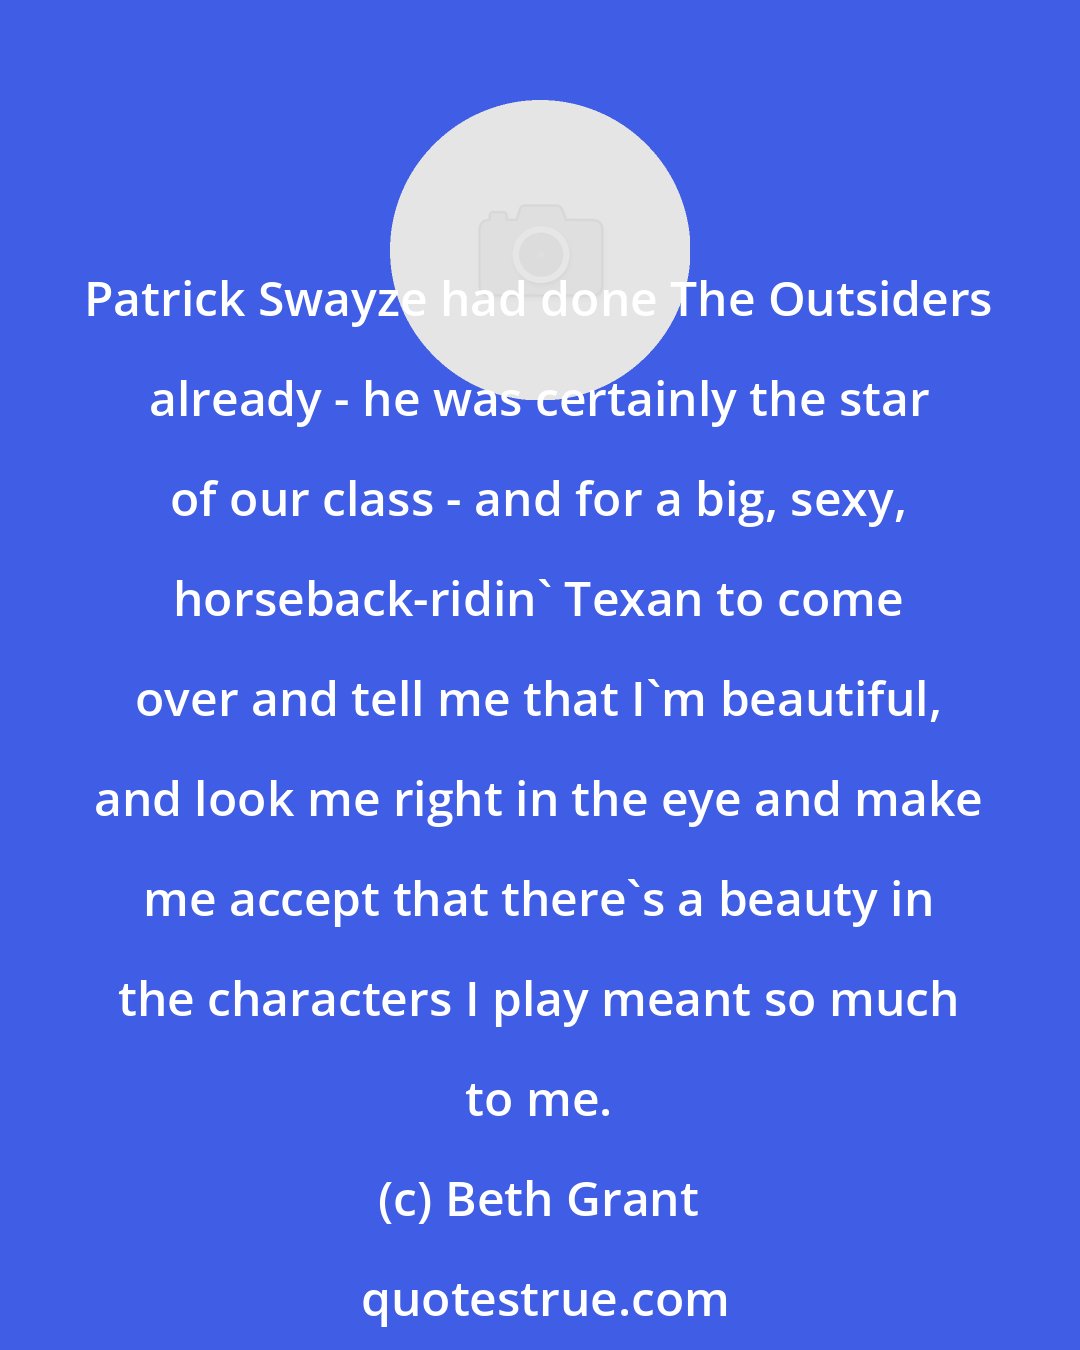 Beth Grant: Patrick Swayze had done The Outsiders already - he was certainly the star of our class - and for a big, sexy, horseback-ridin' Texan to come over and tell me that I'm beautiful, and look me right in the eye and make me accept that there's a beauty in the characters I play meant so much to me.